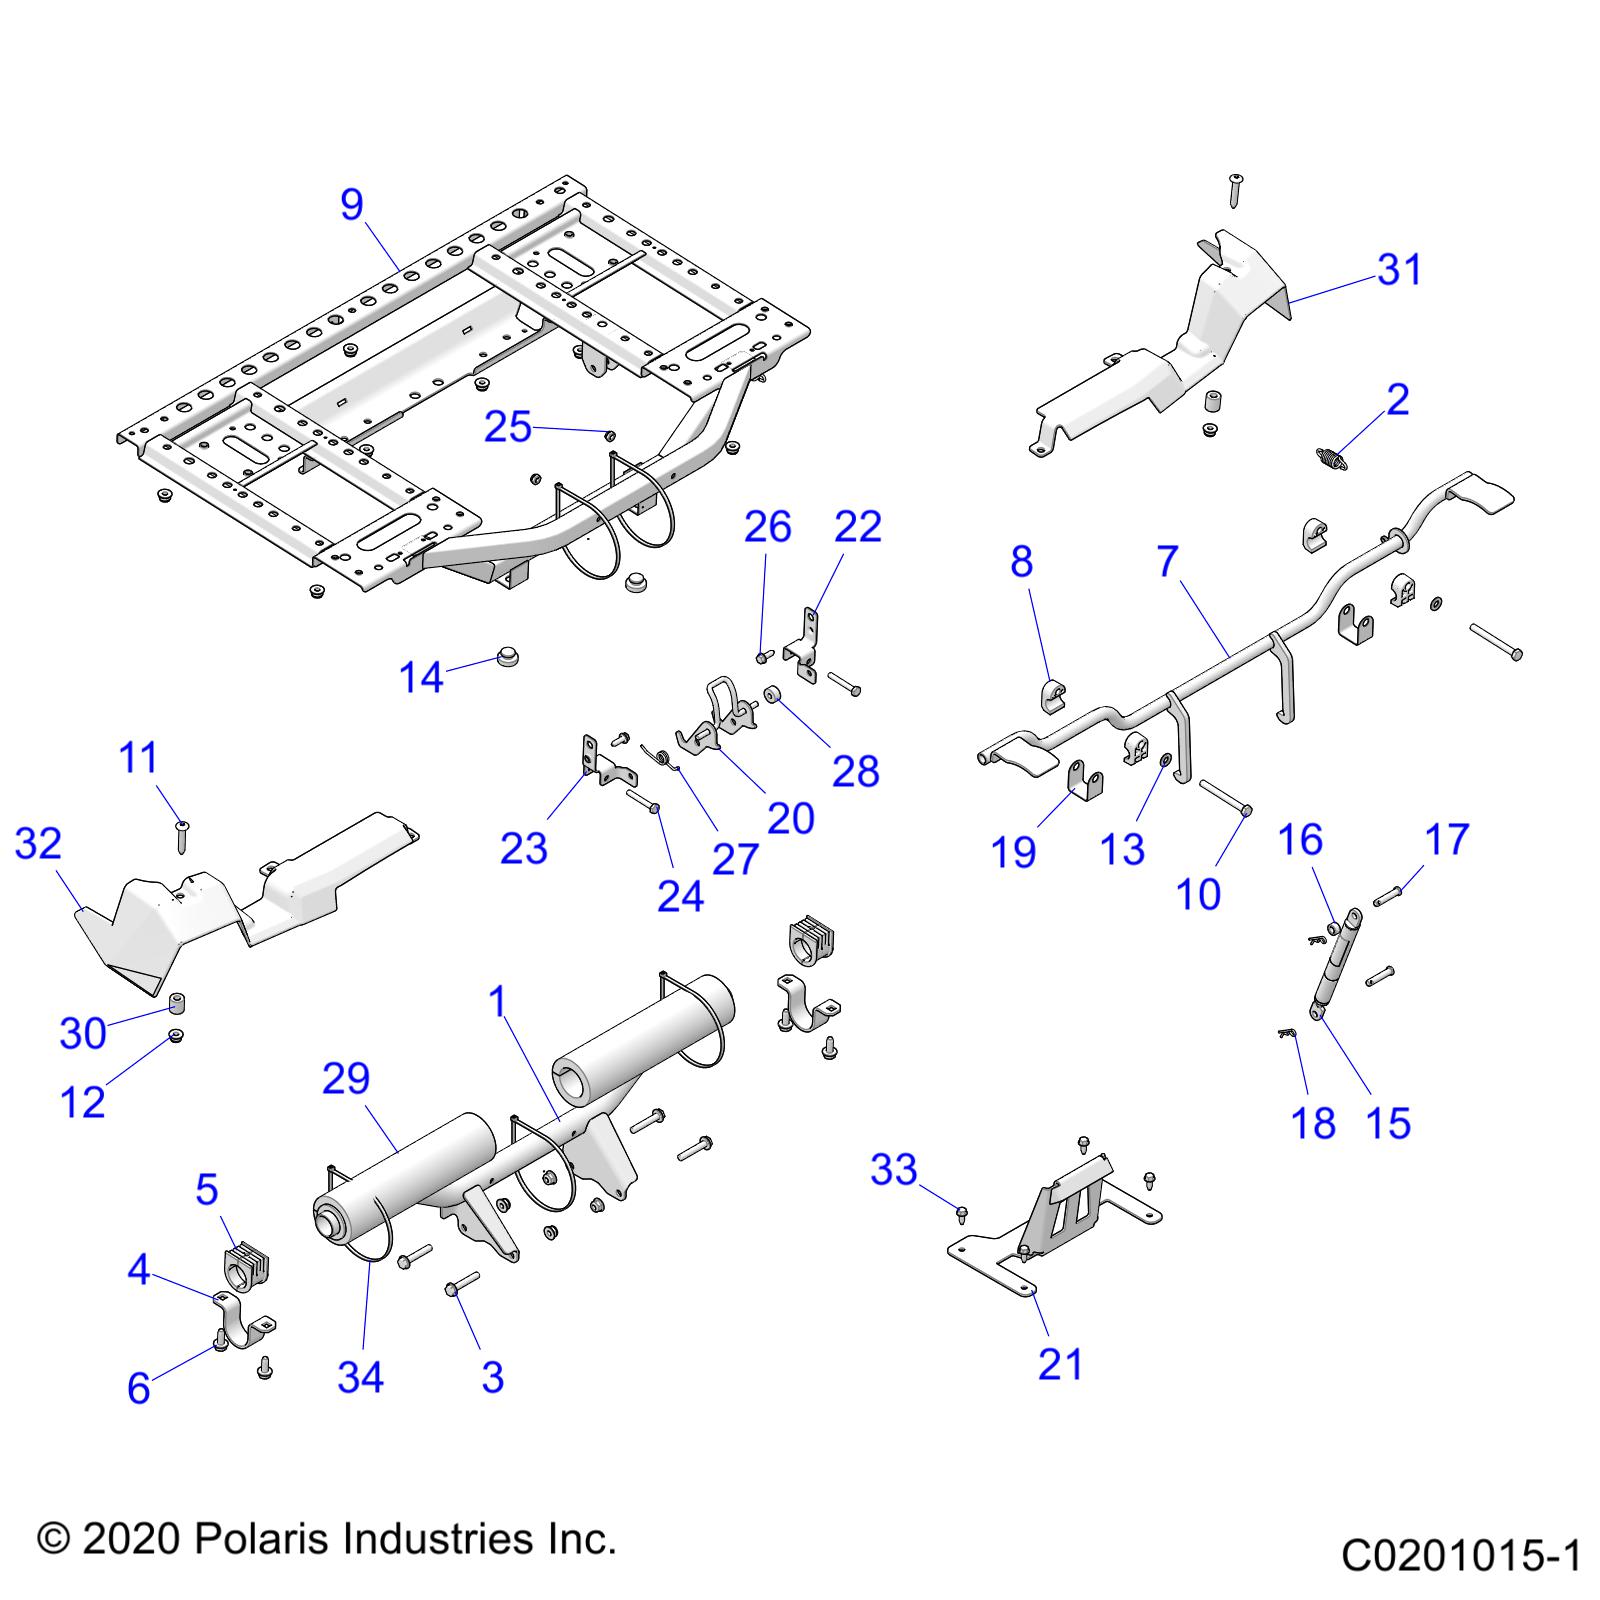 Part Number : 7661163 PIN-CLEVIS 5/16X1 1/2 (10)